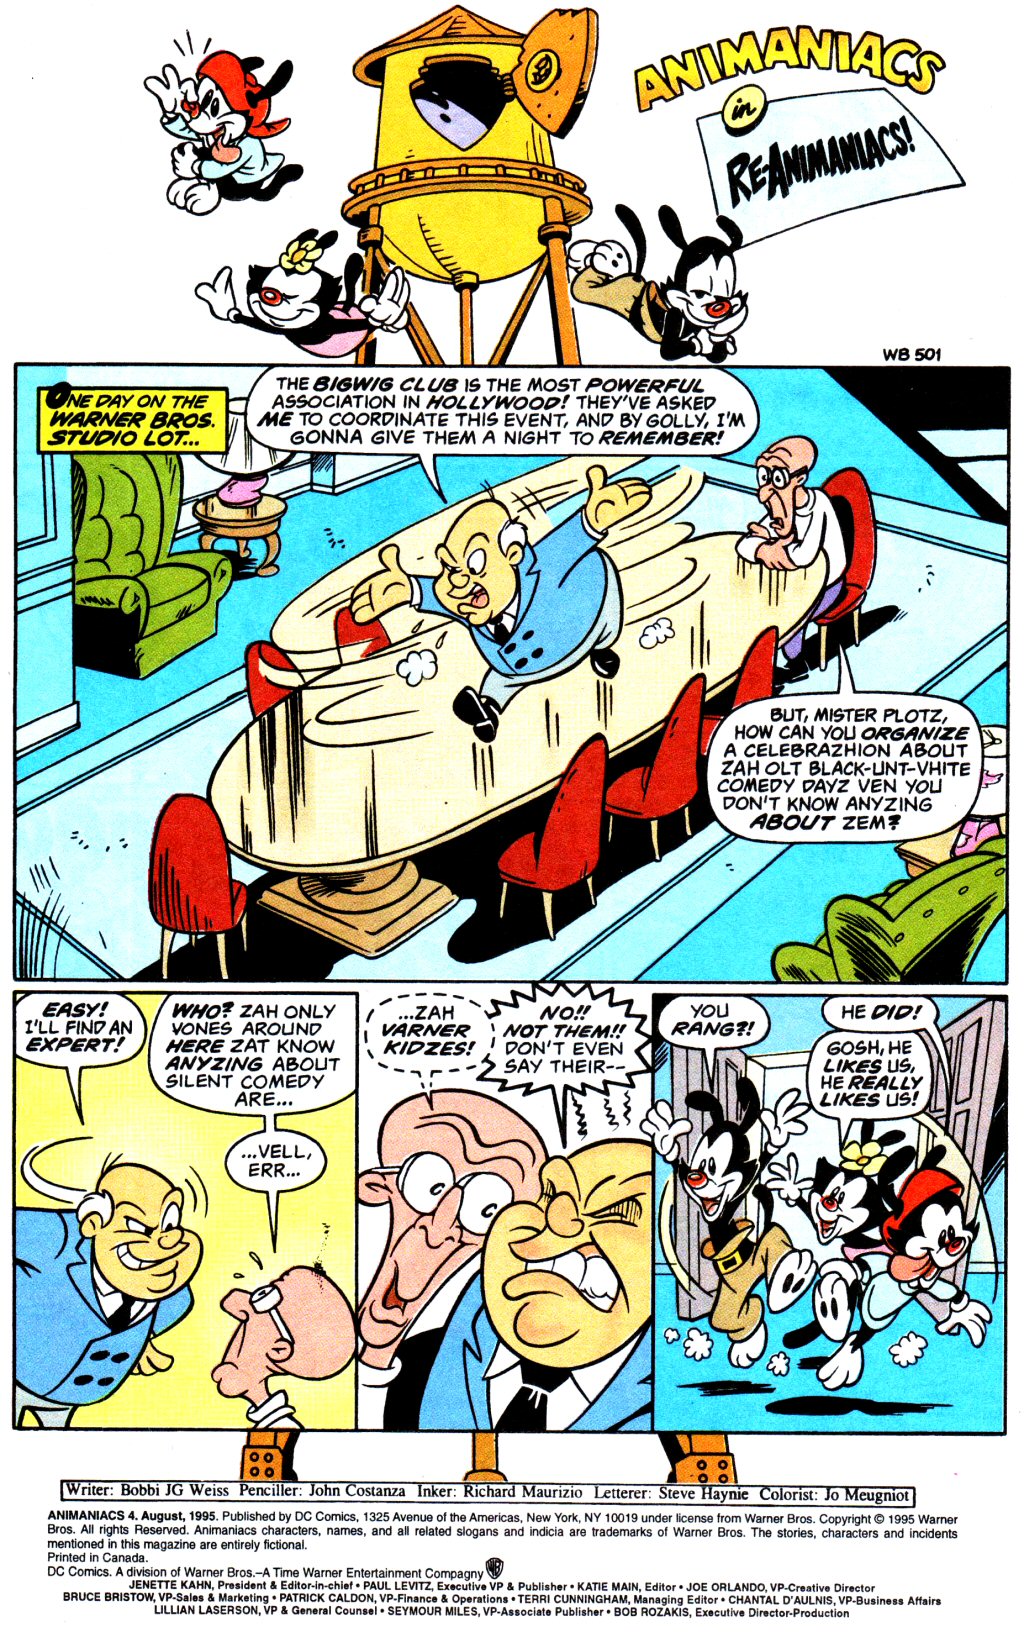 Animaniacs Issue 4 | Read Animaniacs Issue 4 comic online in high quality.  Read Full Comic online for free - Read comics online in high quality .|  READ COMIC ONLINE